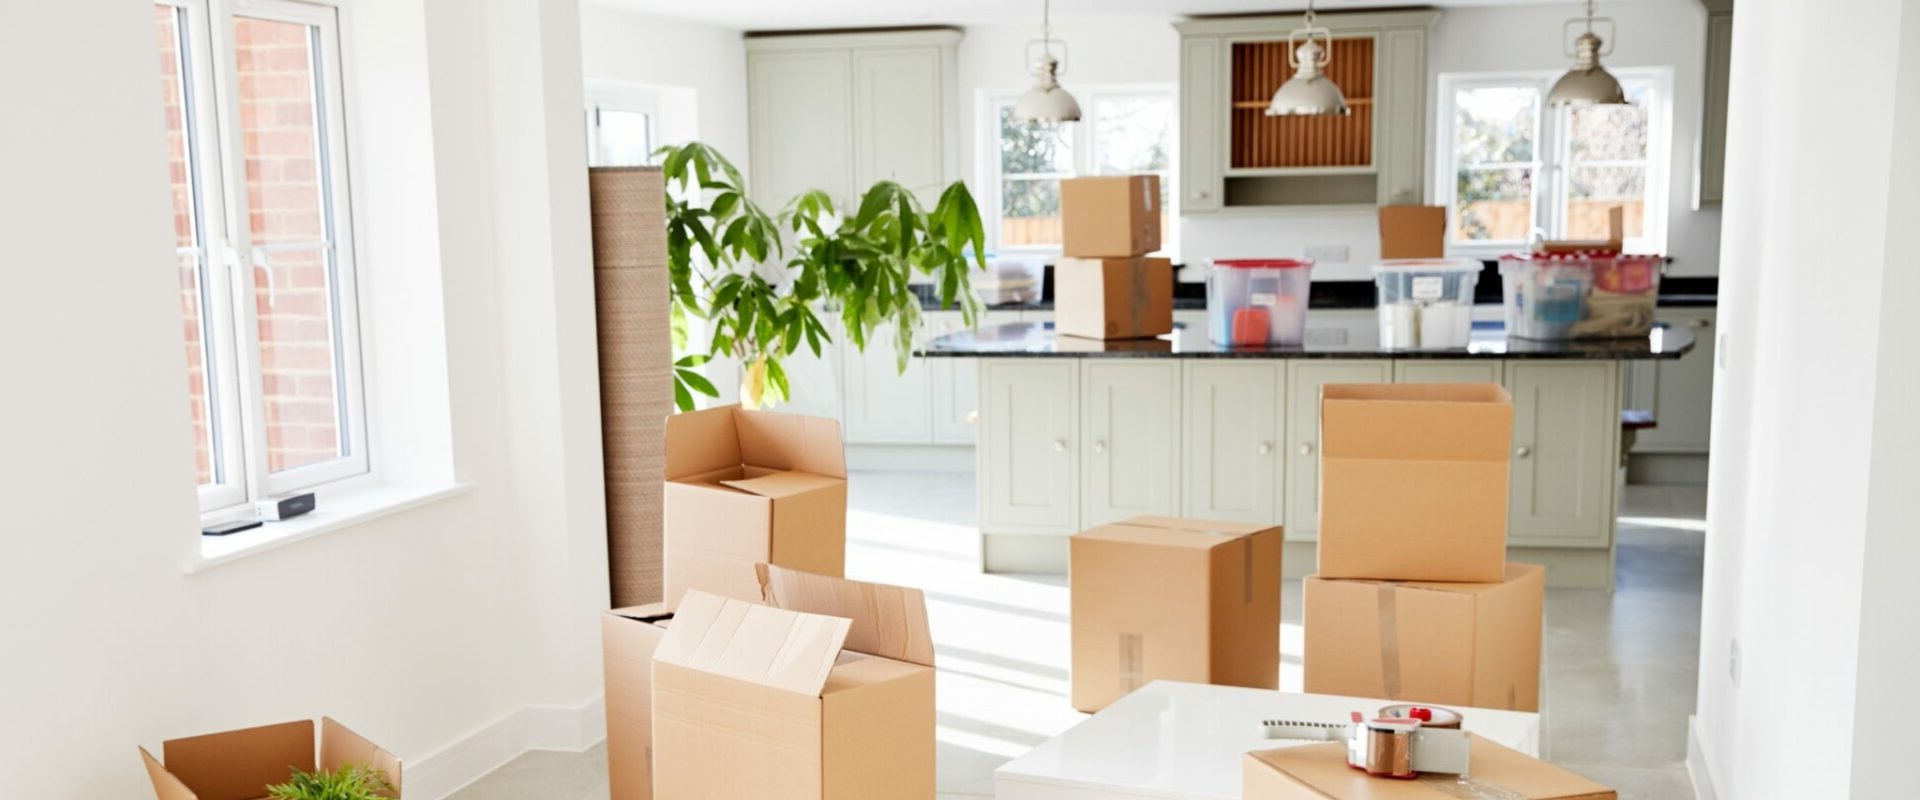 How to Confirm Dates and Times with Your Long Distance Movers